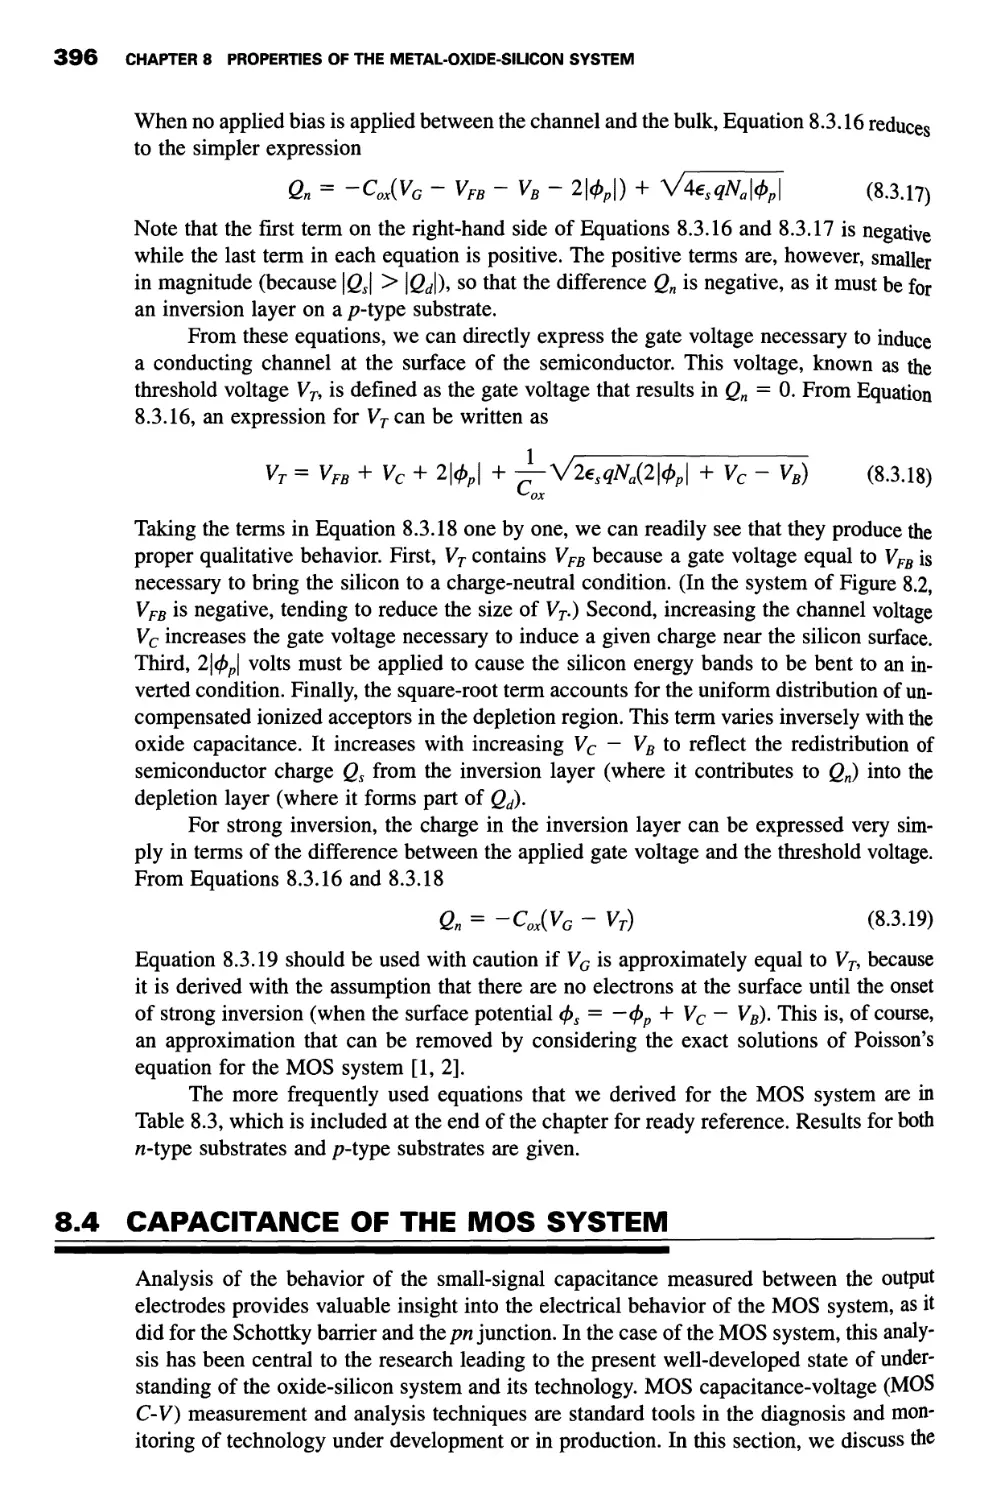 8.4 Capacitance of the MOS System